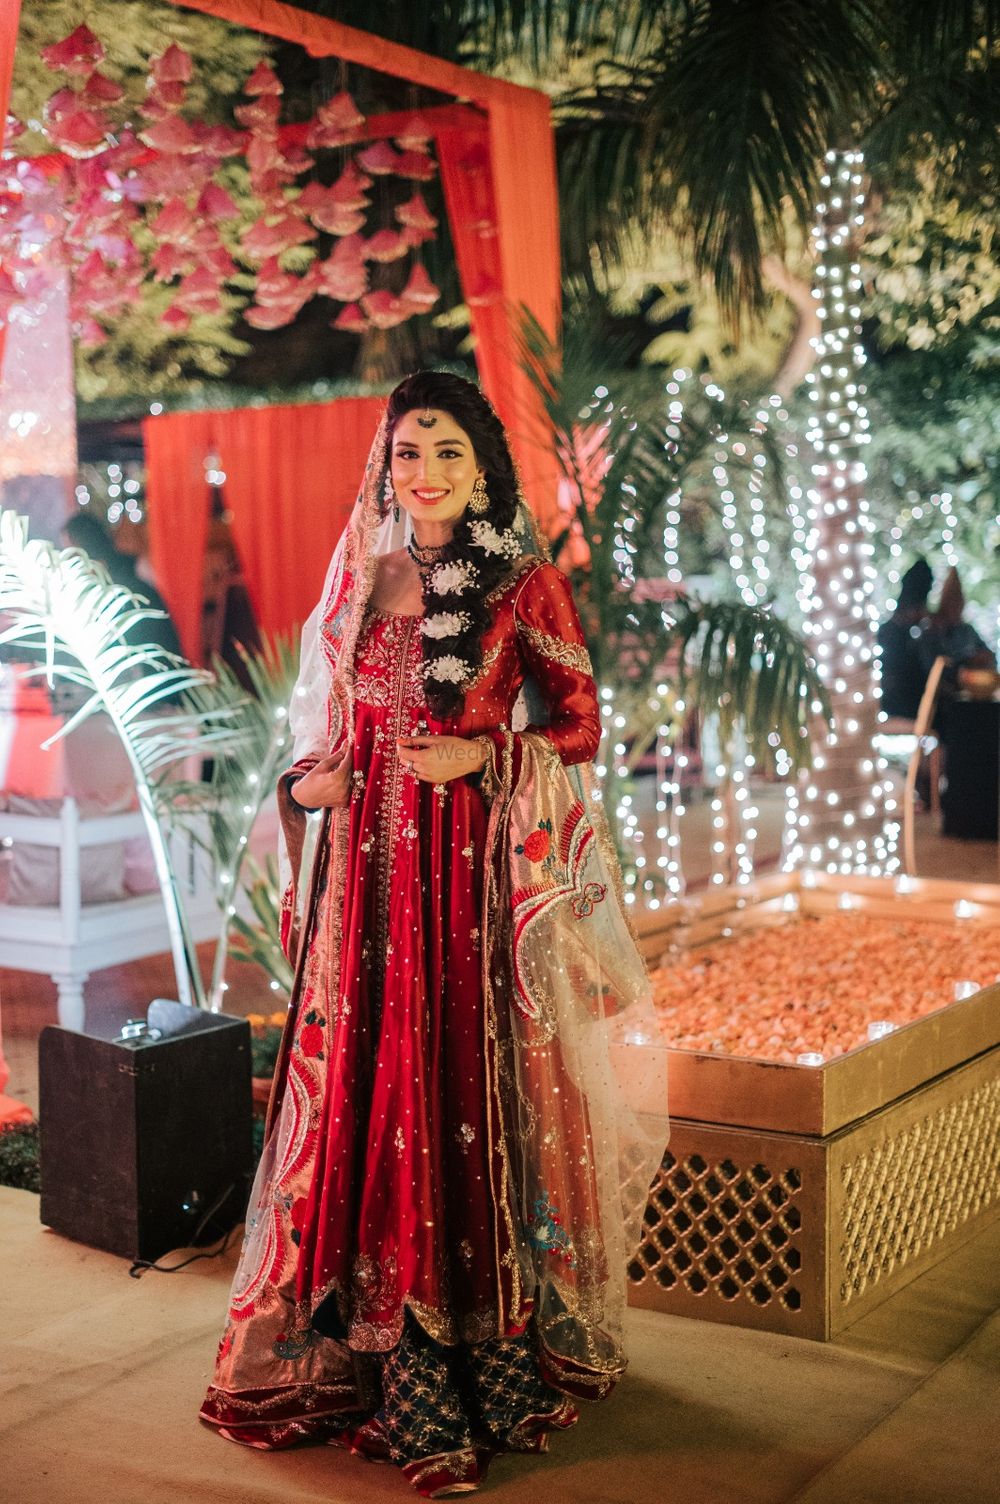 Photo of Bride dressed in a unique mehndi outfit with a braided hairdo.